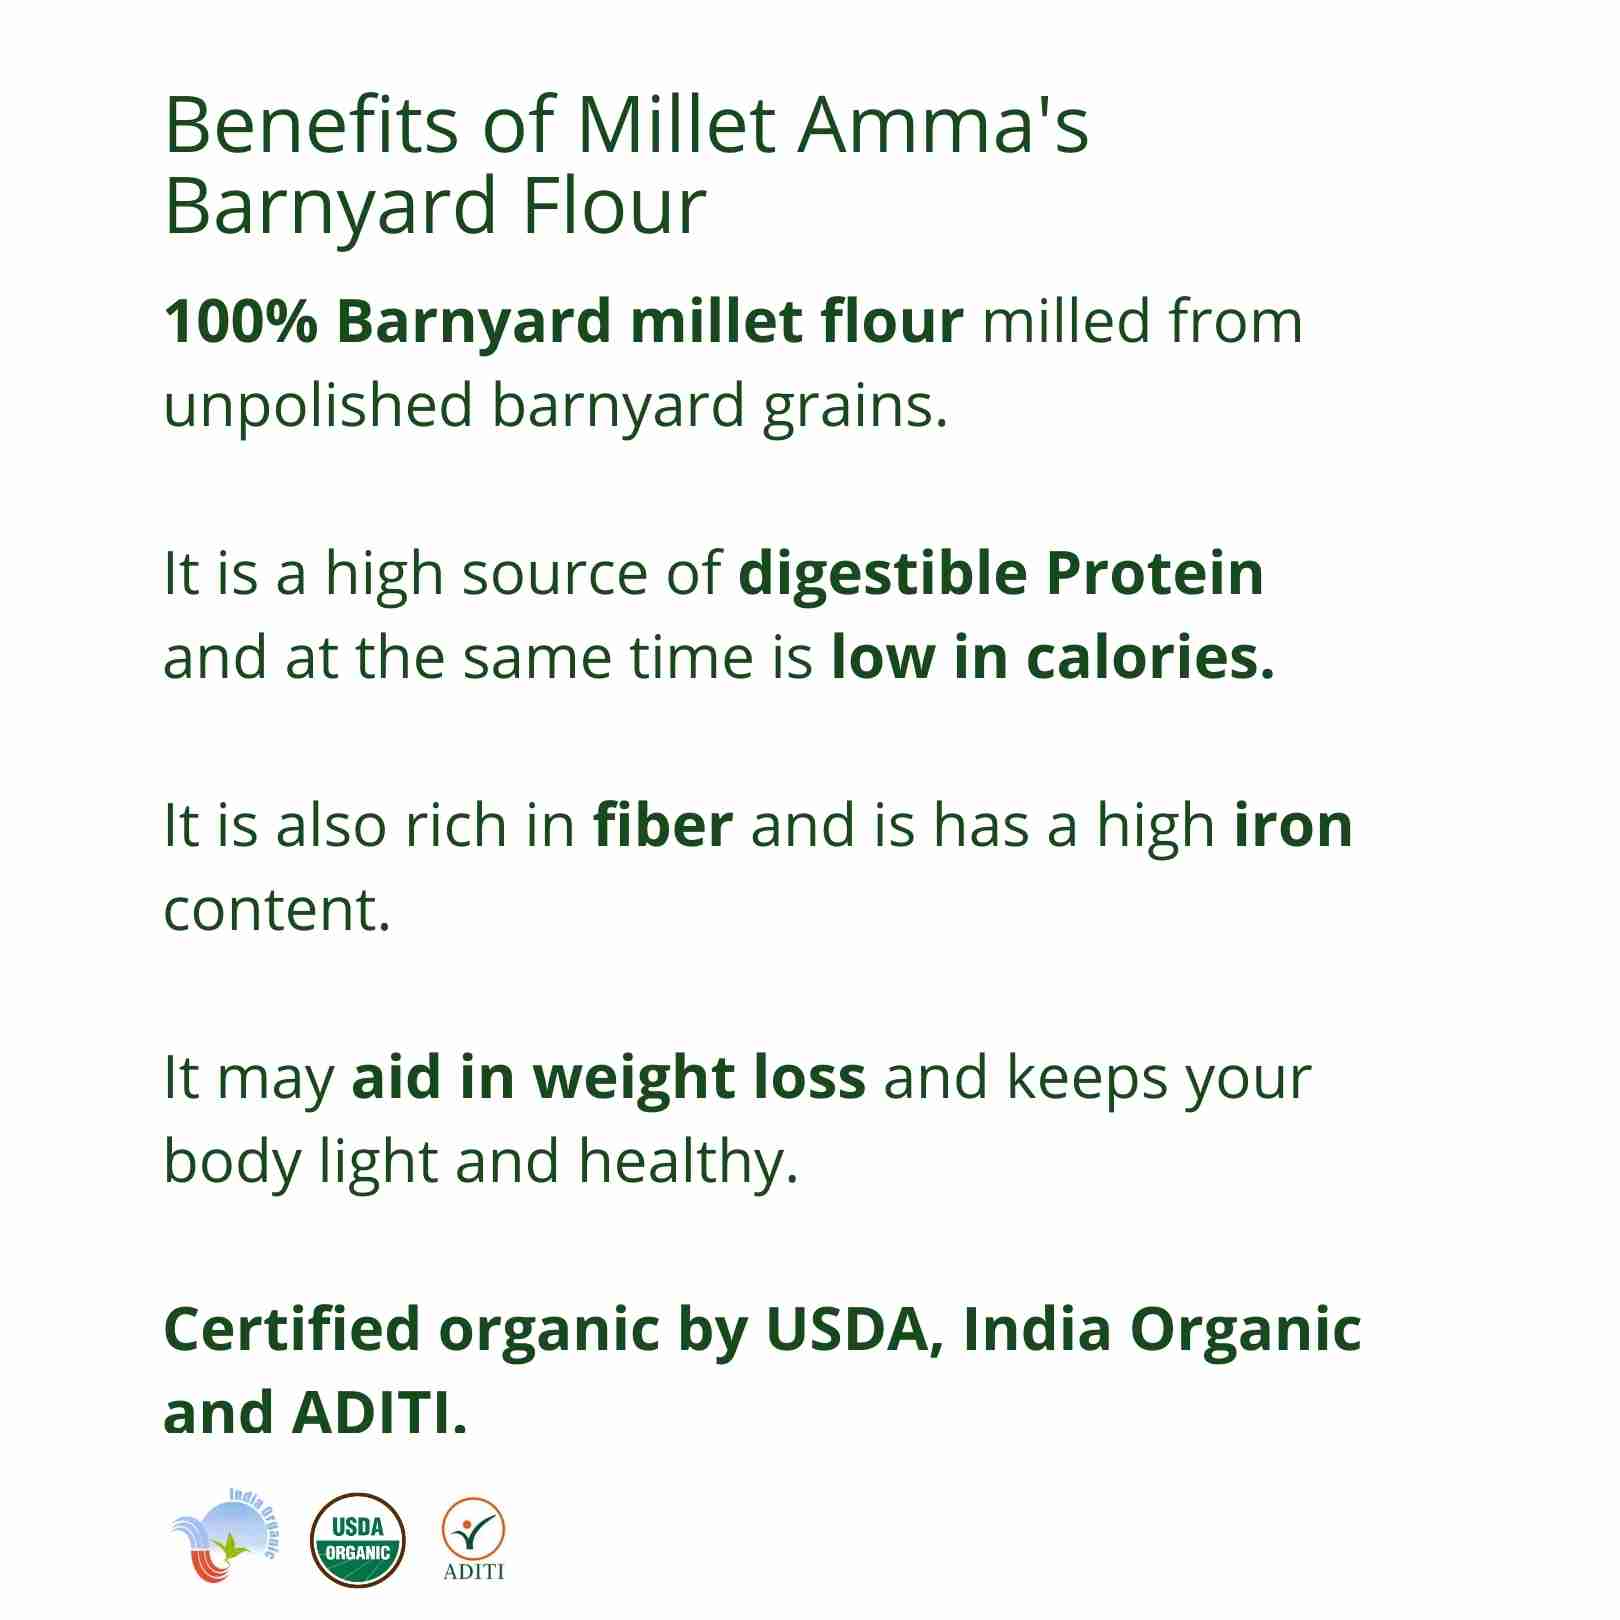 Millet Amma’s Organic Barnyard Millet Flour- Millet Amma’s Organic Barnyard Millet Flour is a rich source of dietary fibers.  Unpolished Barnyard Millets are loaded with iron, zinc and potassium.  Barnyard Millet is an ideal option for a millet diet that aids in weight management.  You can make a variety of gluten free dishes with our Barnyard Millet Flour like rotis, parathas, crepes, pancakes and cake.